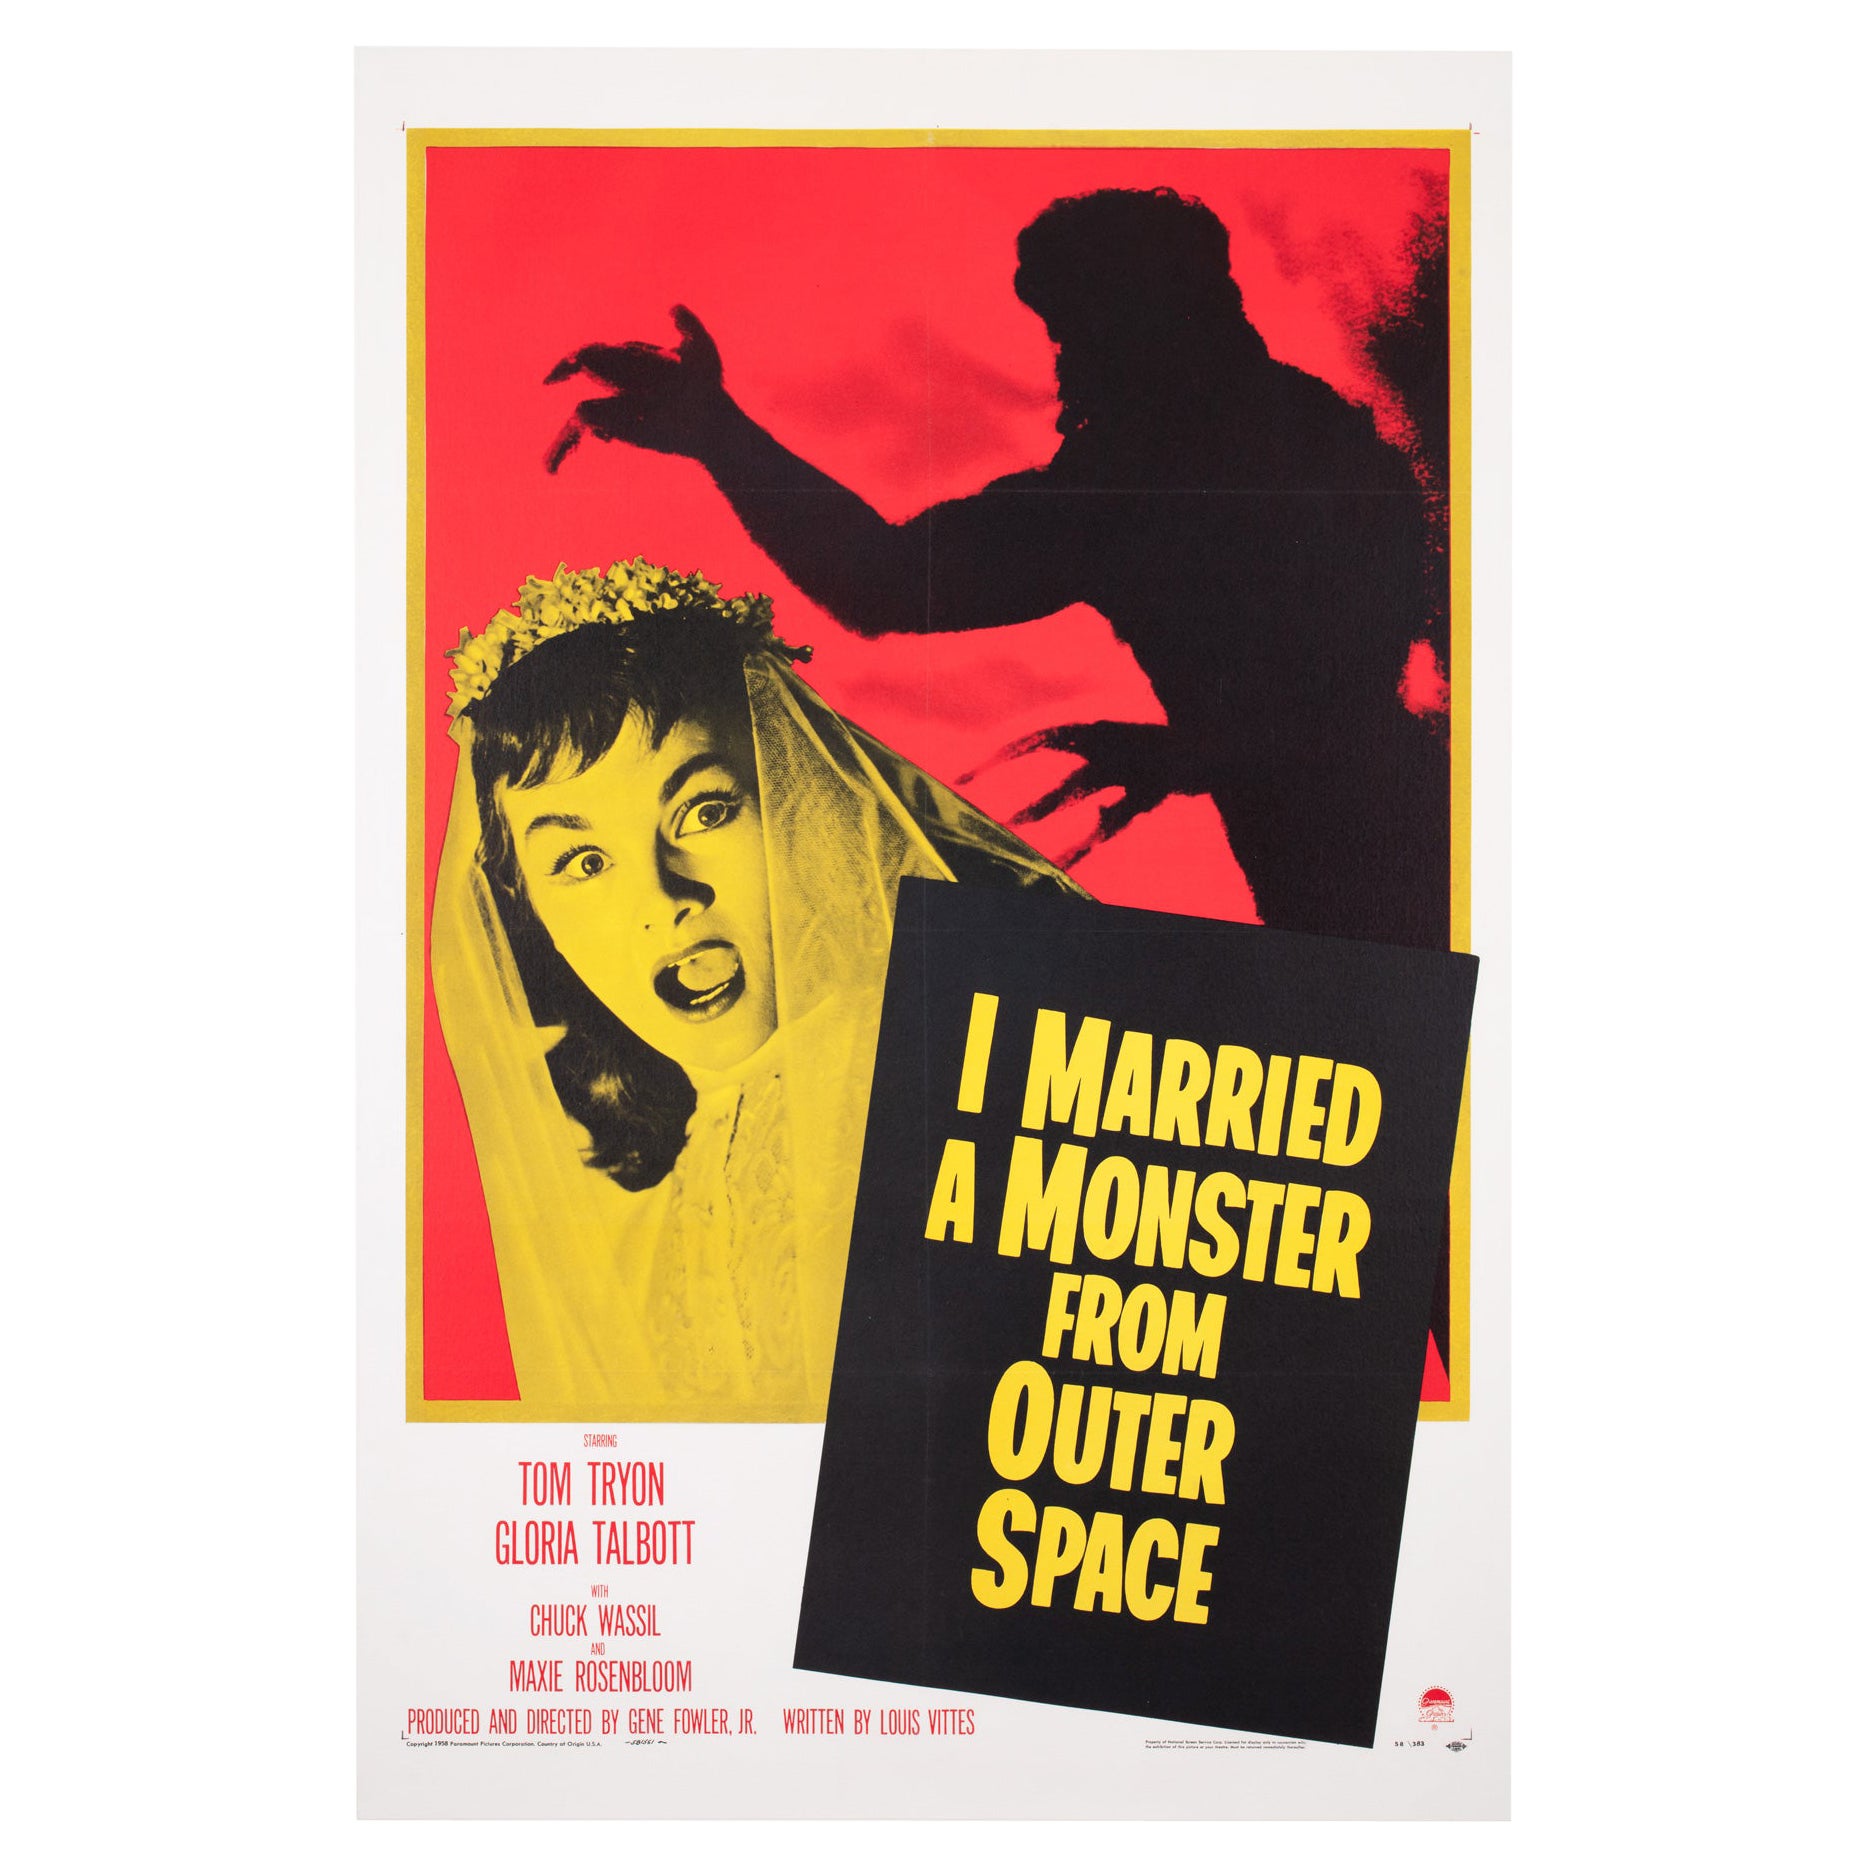 ""I Married a Monster from Outer Space" US 1 Blatt Filmplakat, 1958